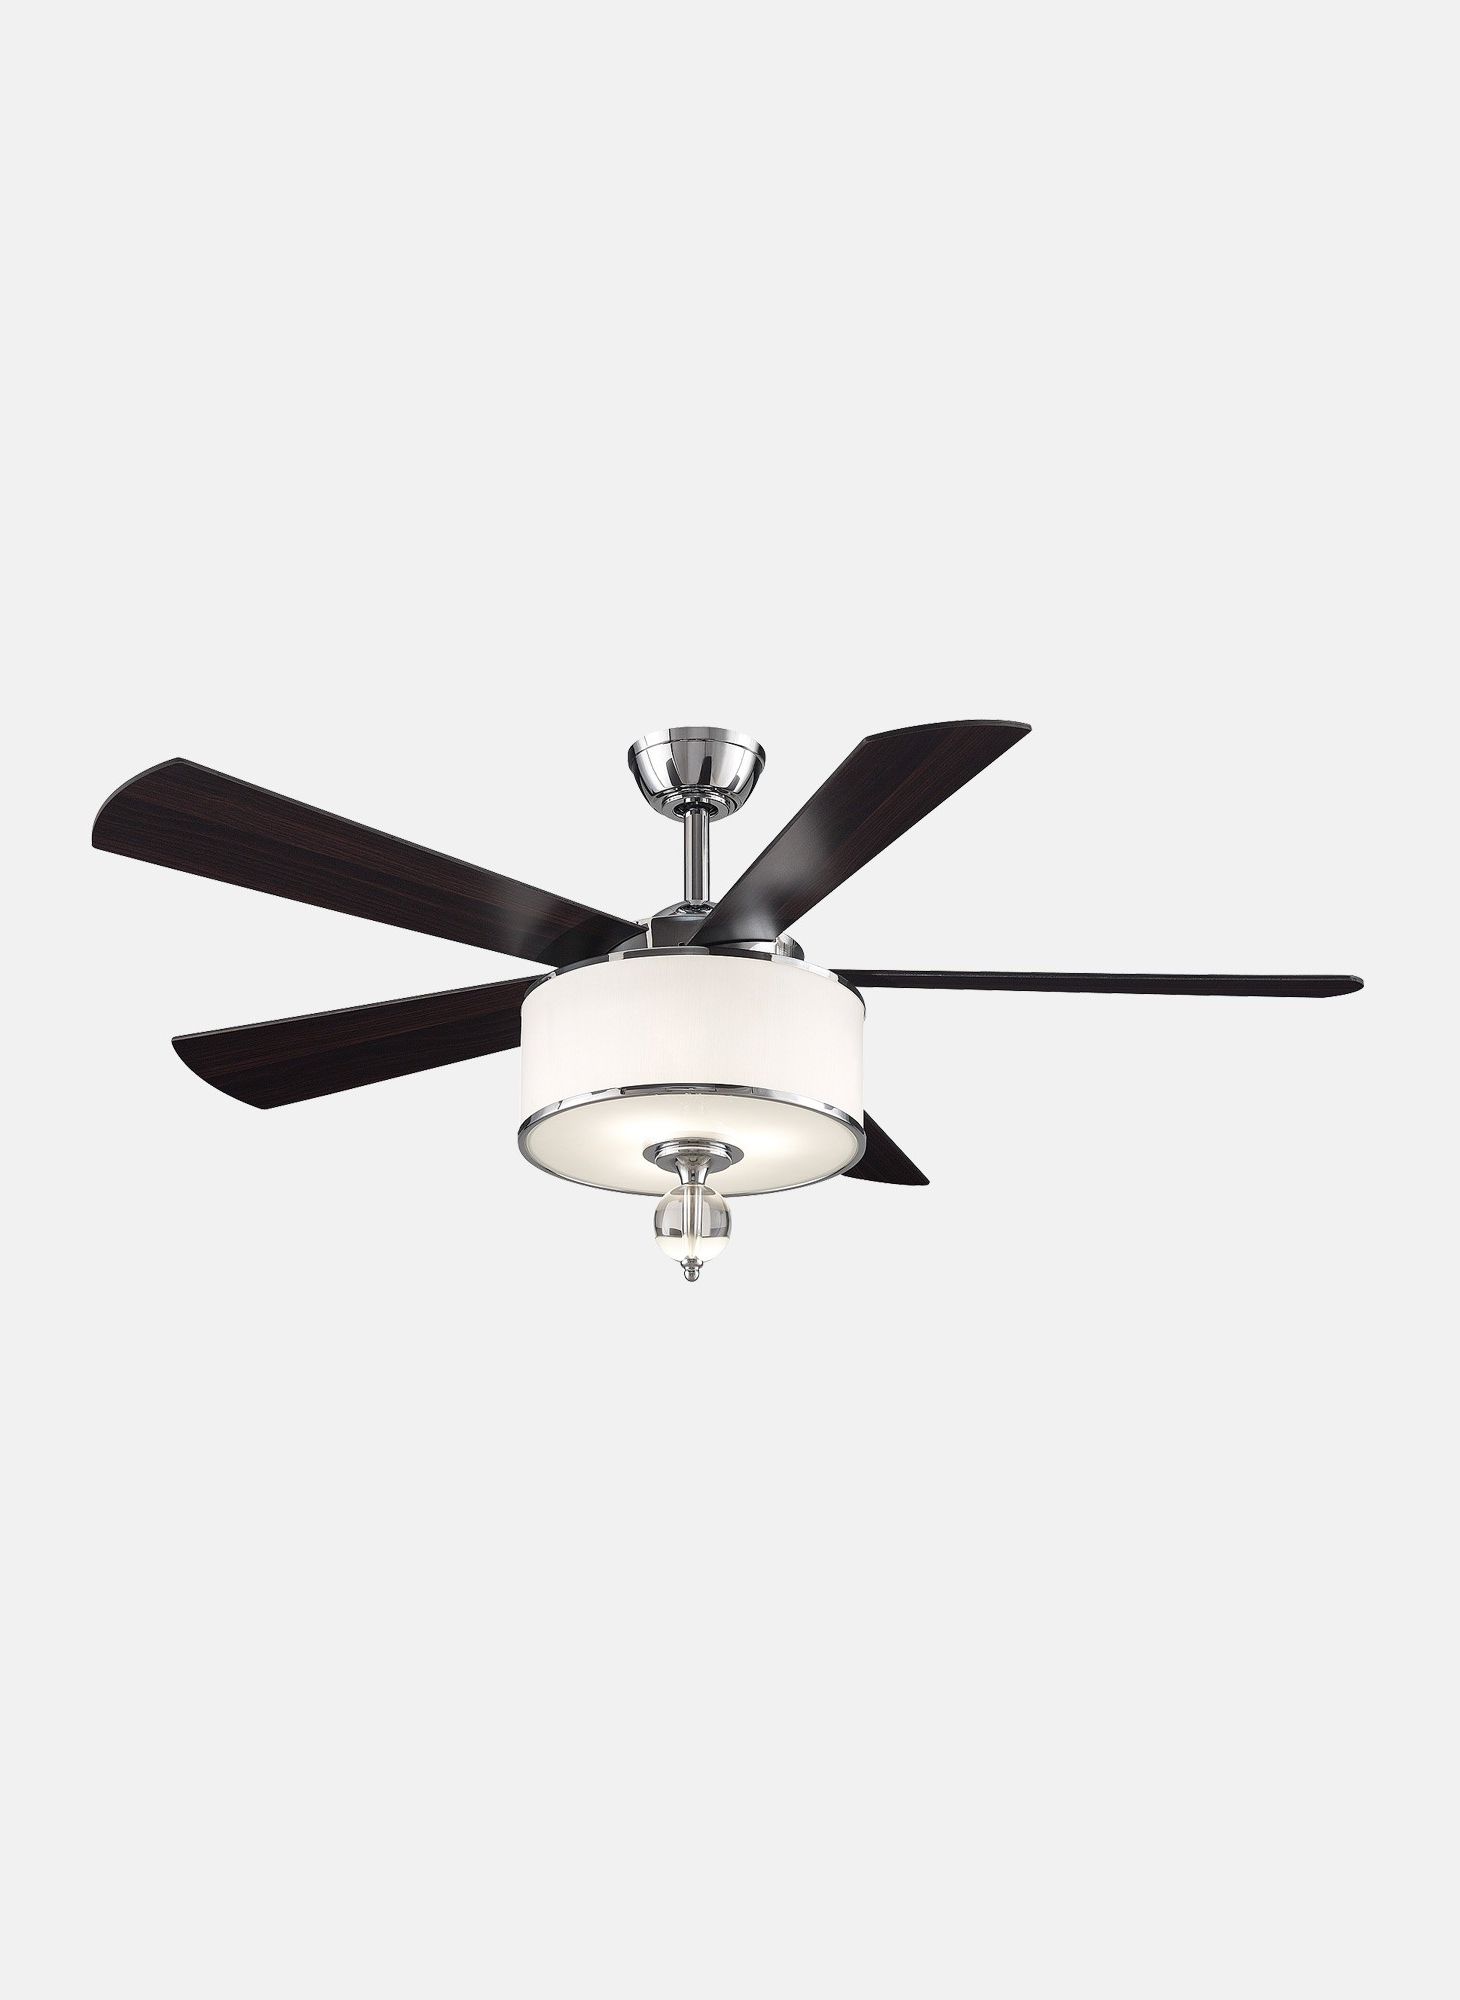 Best And Newest Victorian Style Outdoor Ceiling Fans With Victoria Harbor – Fans (View 12 of 20)